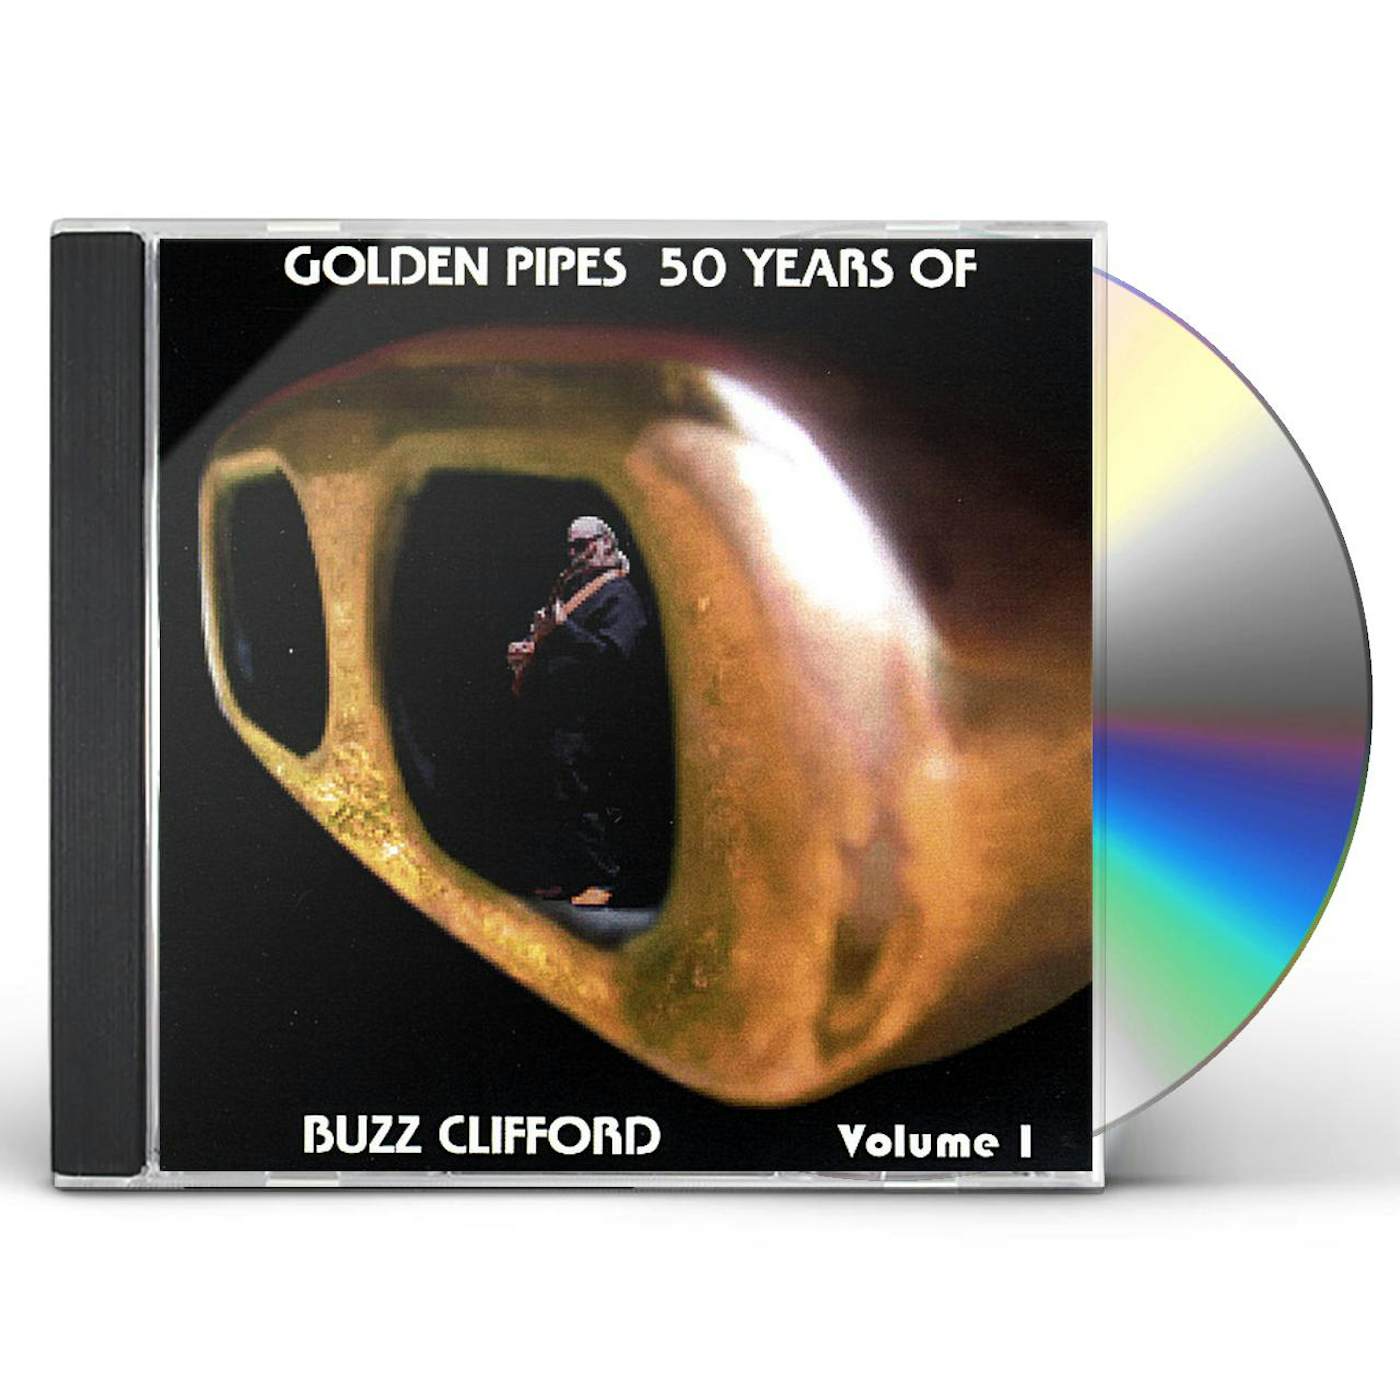 GOLDEN PIPES 50 YEARS OF BUZZ CLIFFORD CD